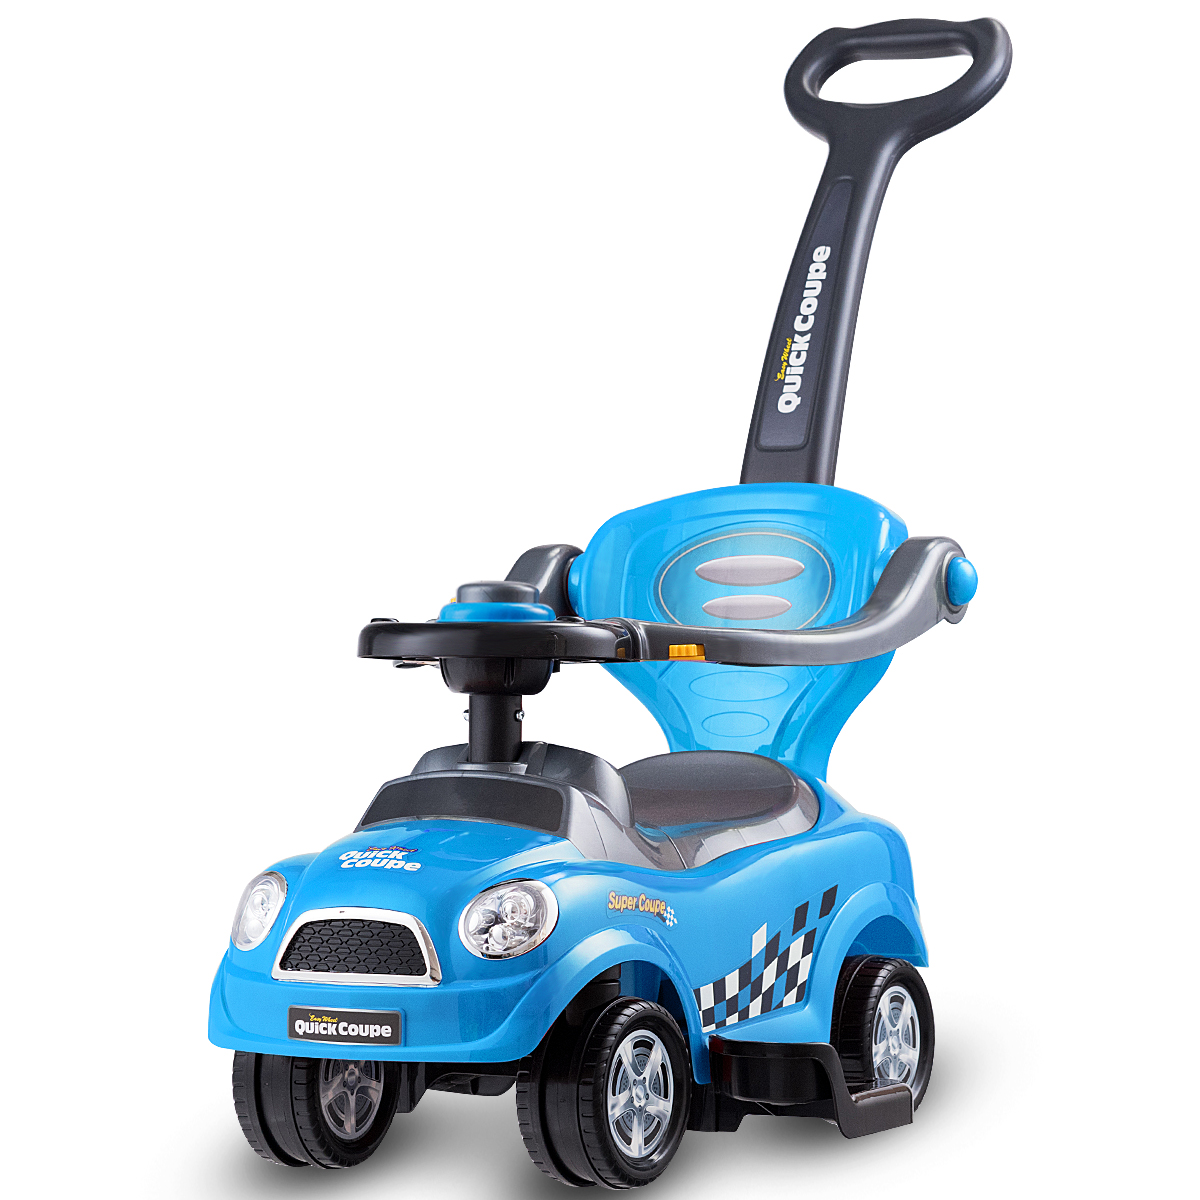 Kids 3 in 1 Ride on Car with Push Handle-Blue